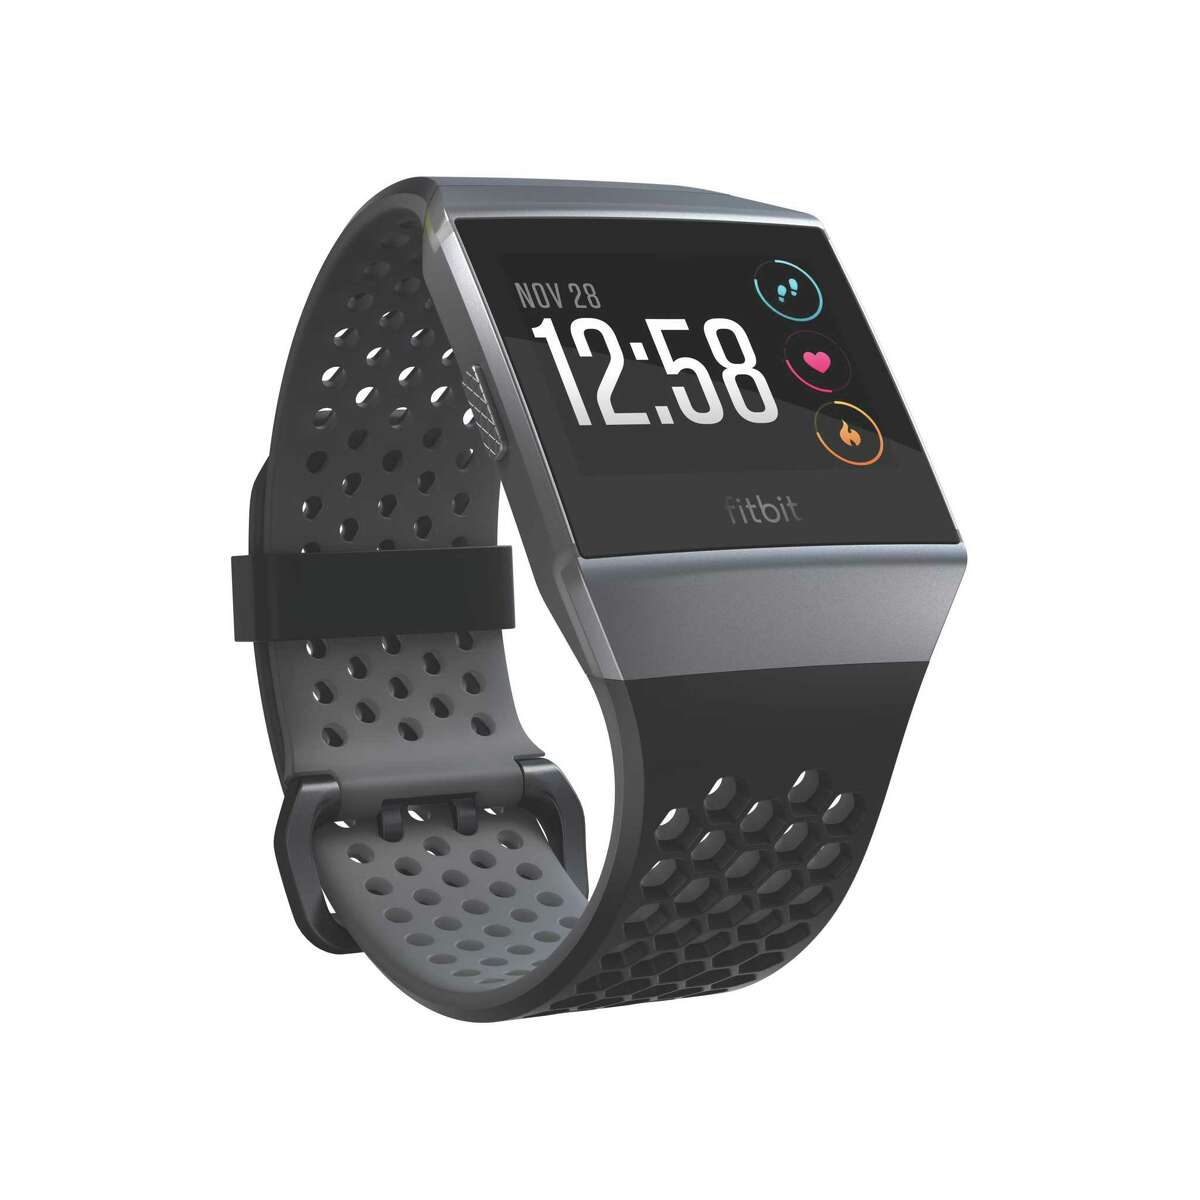 The Fitbit Ionic Smartwach, which is being recalled after reports across the globe that the watch’s battery can overheat and potentially cause serious burns.